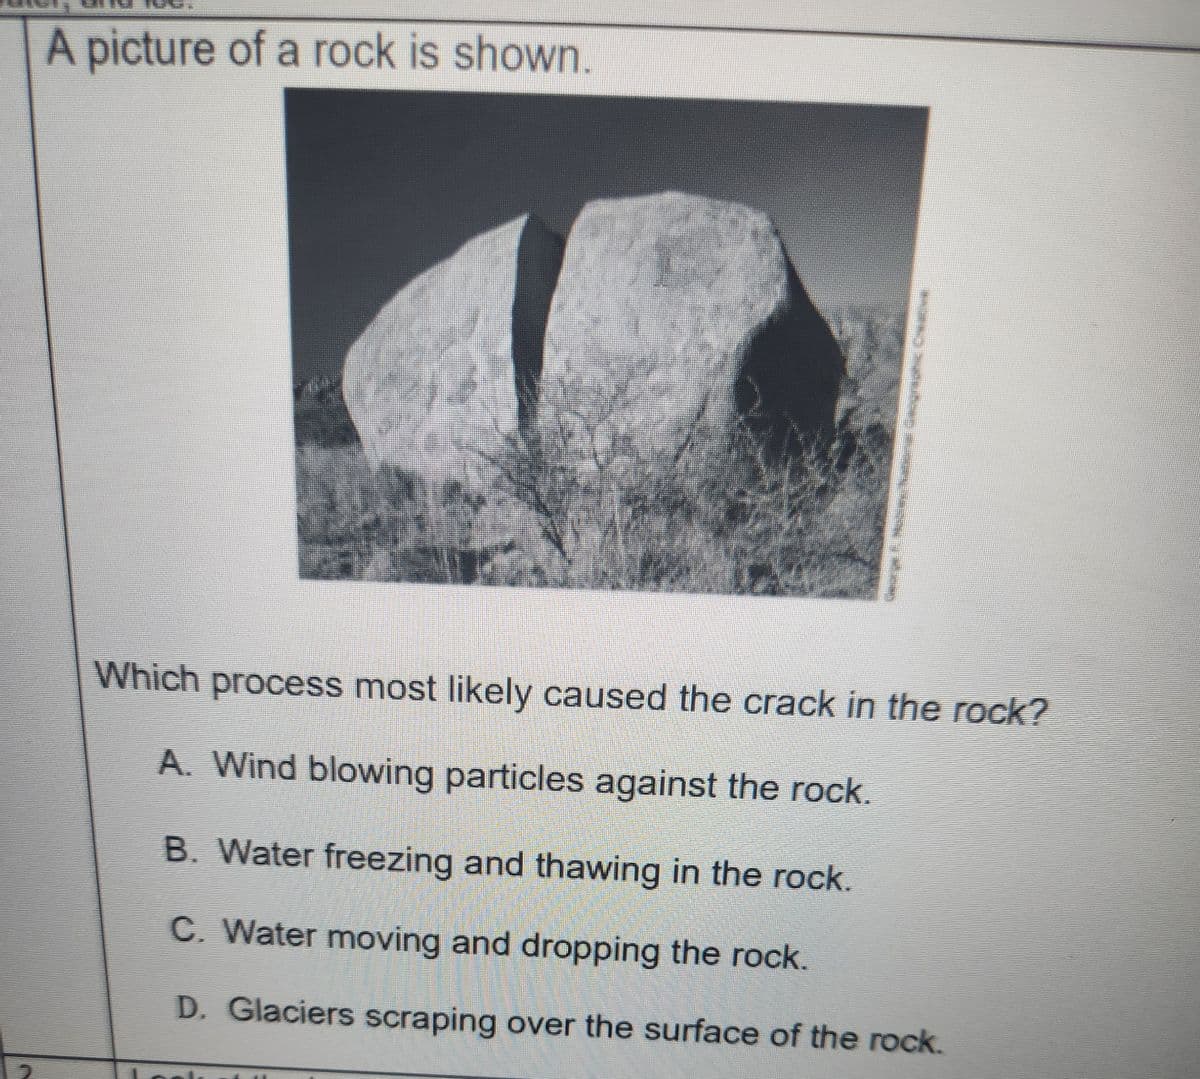 A picture of a rock is shown.
*** Kaver joggeic Creative
Which process most likely caused the crack in the rock?
A. Wind blowing particles against the rock.
B. Water freezing and thawing in the rock.
C. Water moving and dropping the rock.
D. Glaciers scraping over the surface of the rock.